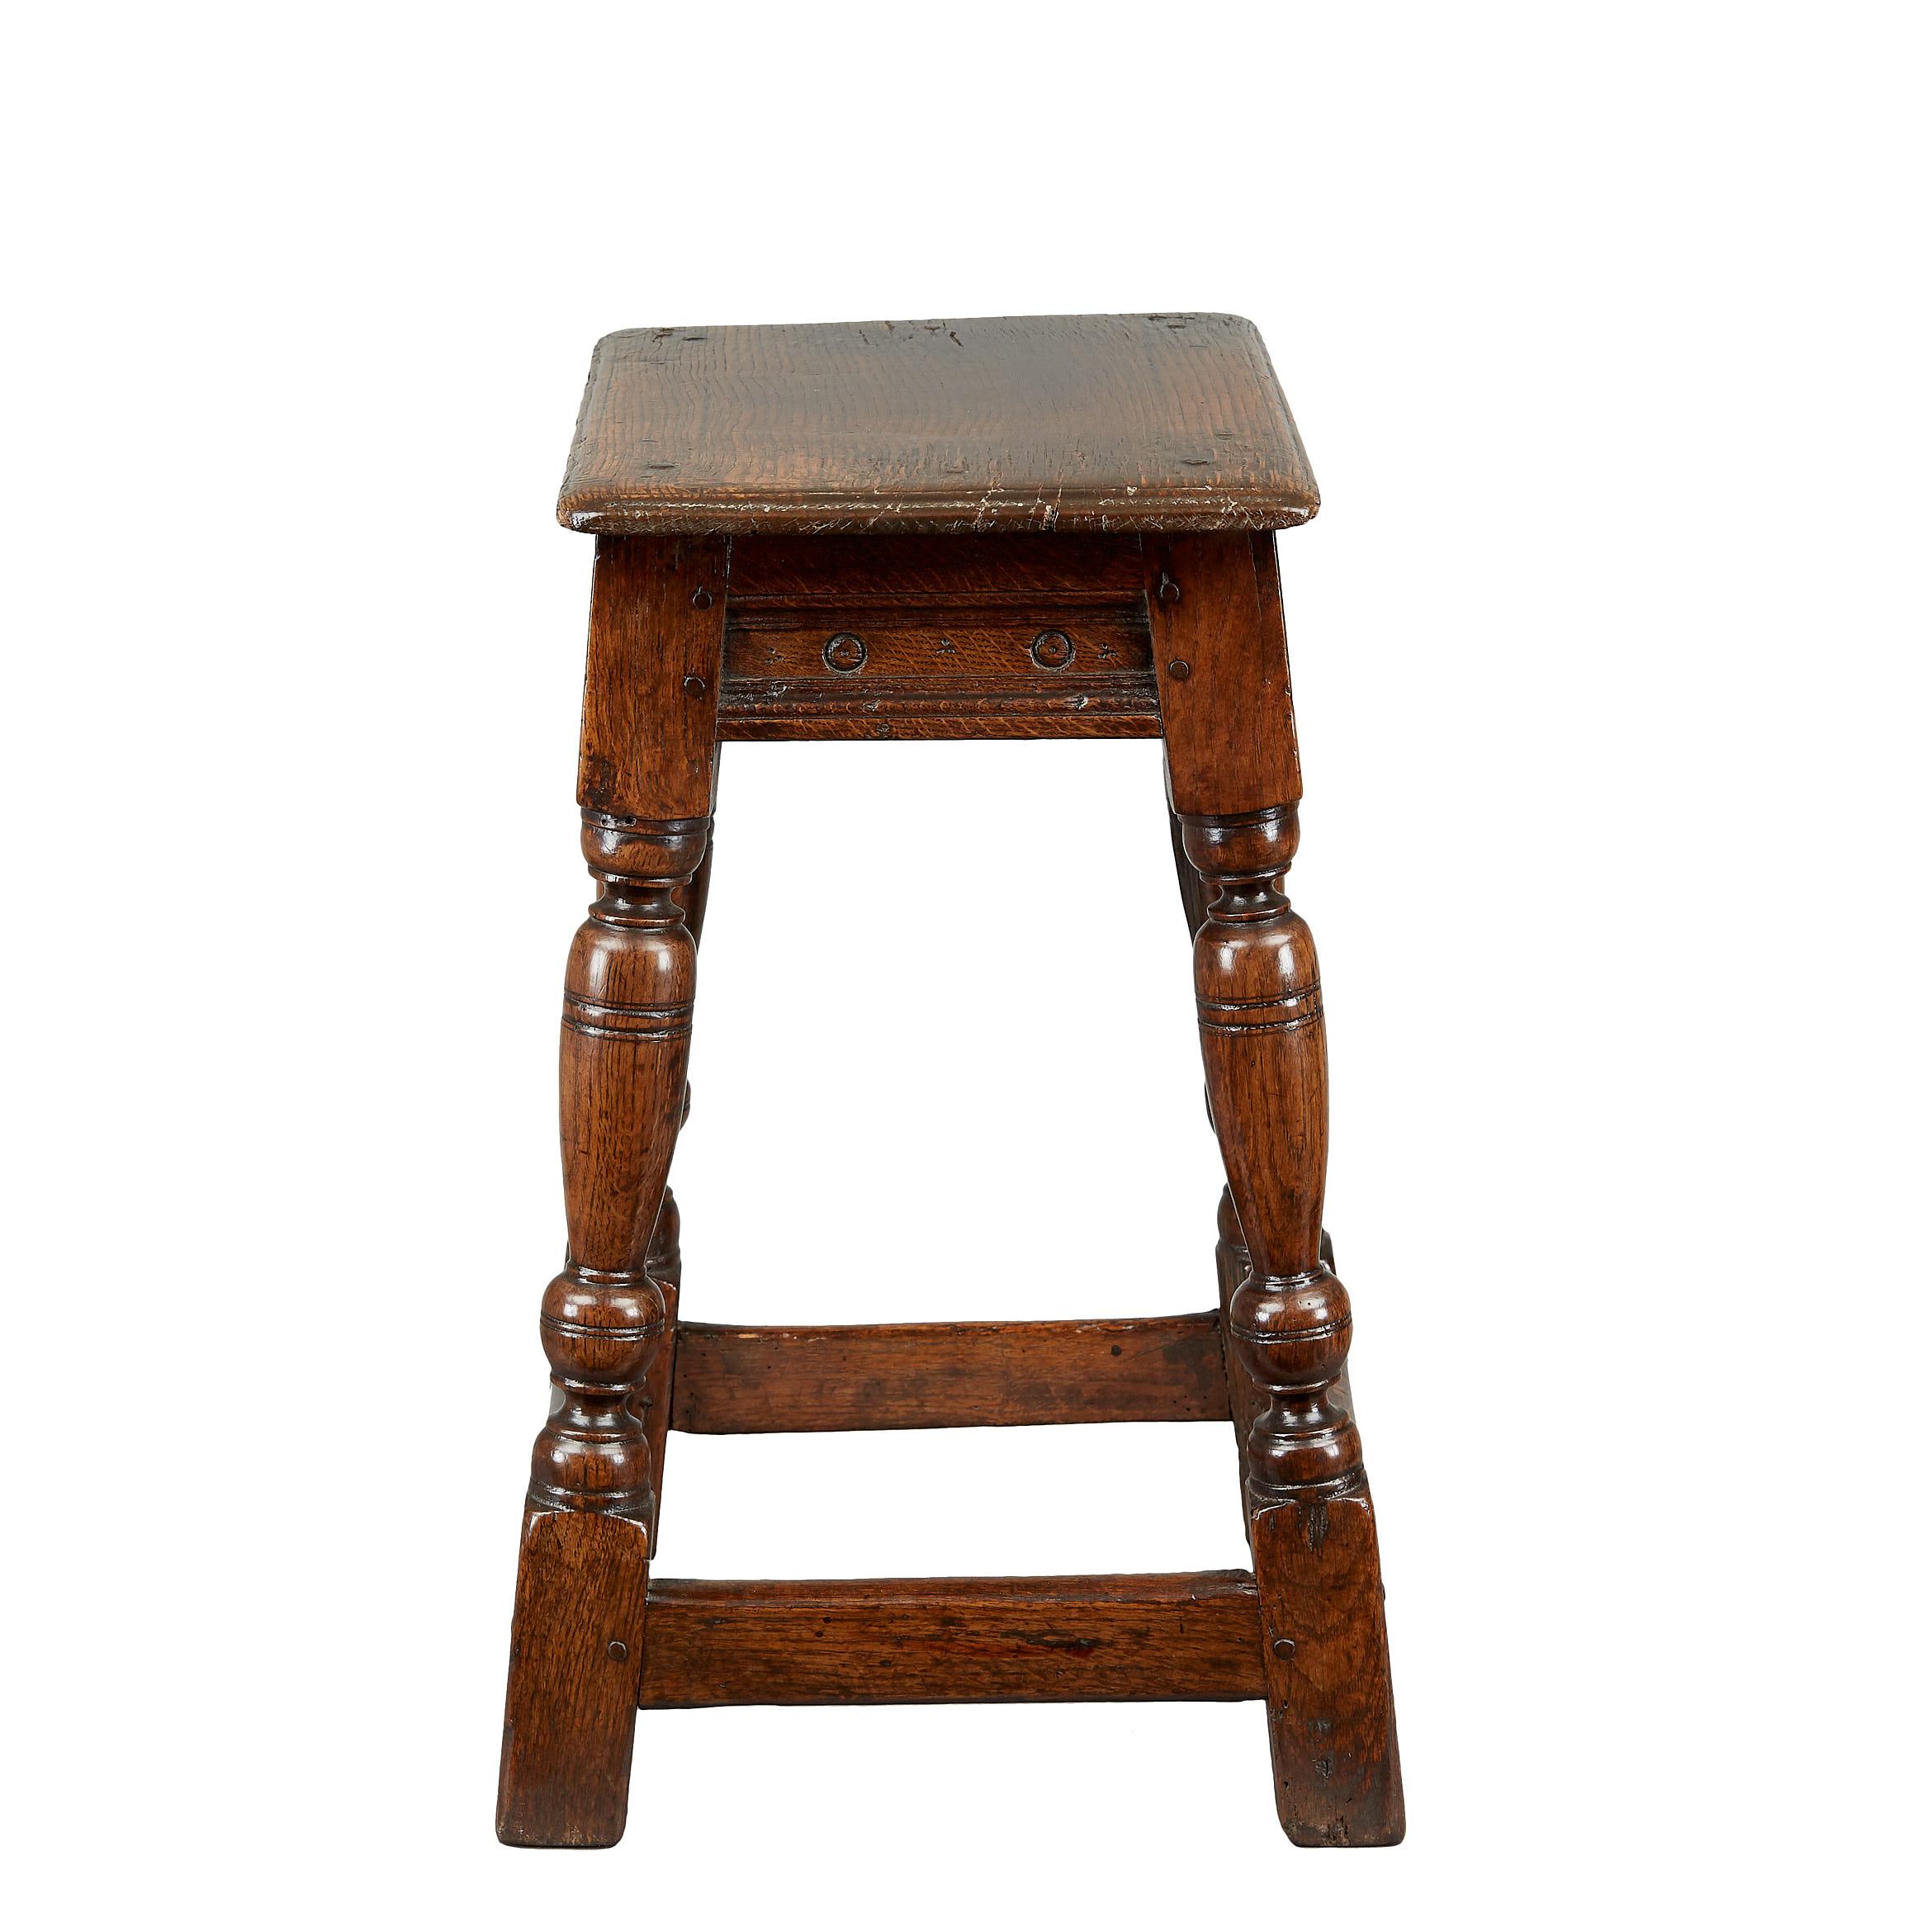 Joinery Oak Joined Stool, Late Elizabethan or James I, English, circa 1600-1620